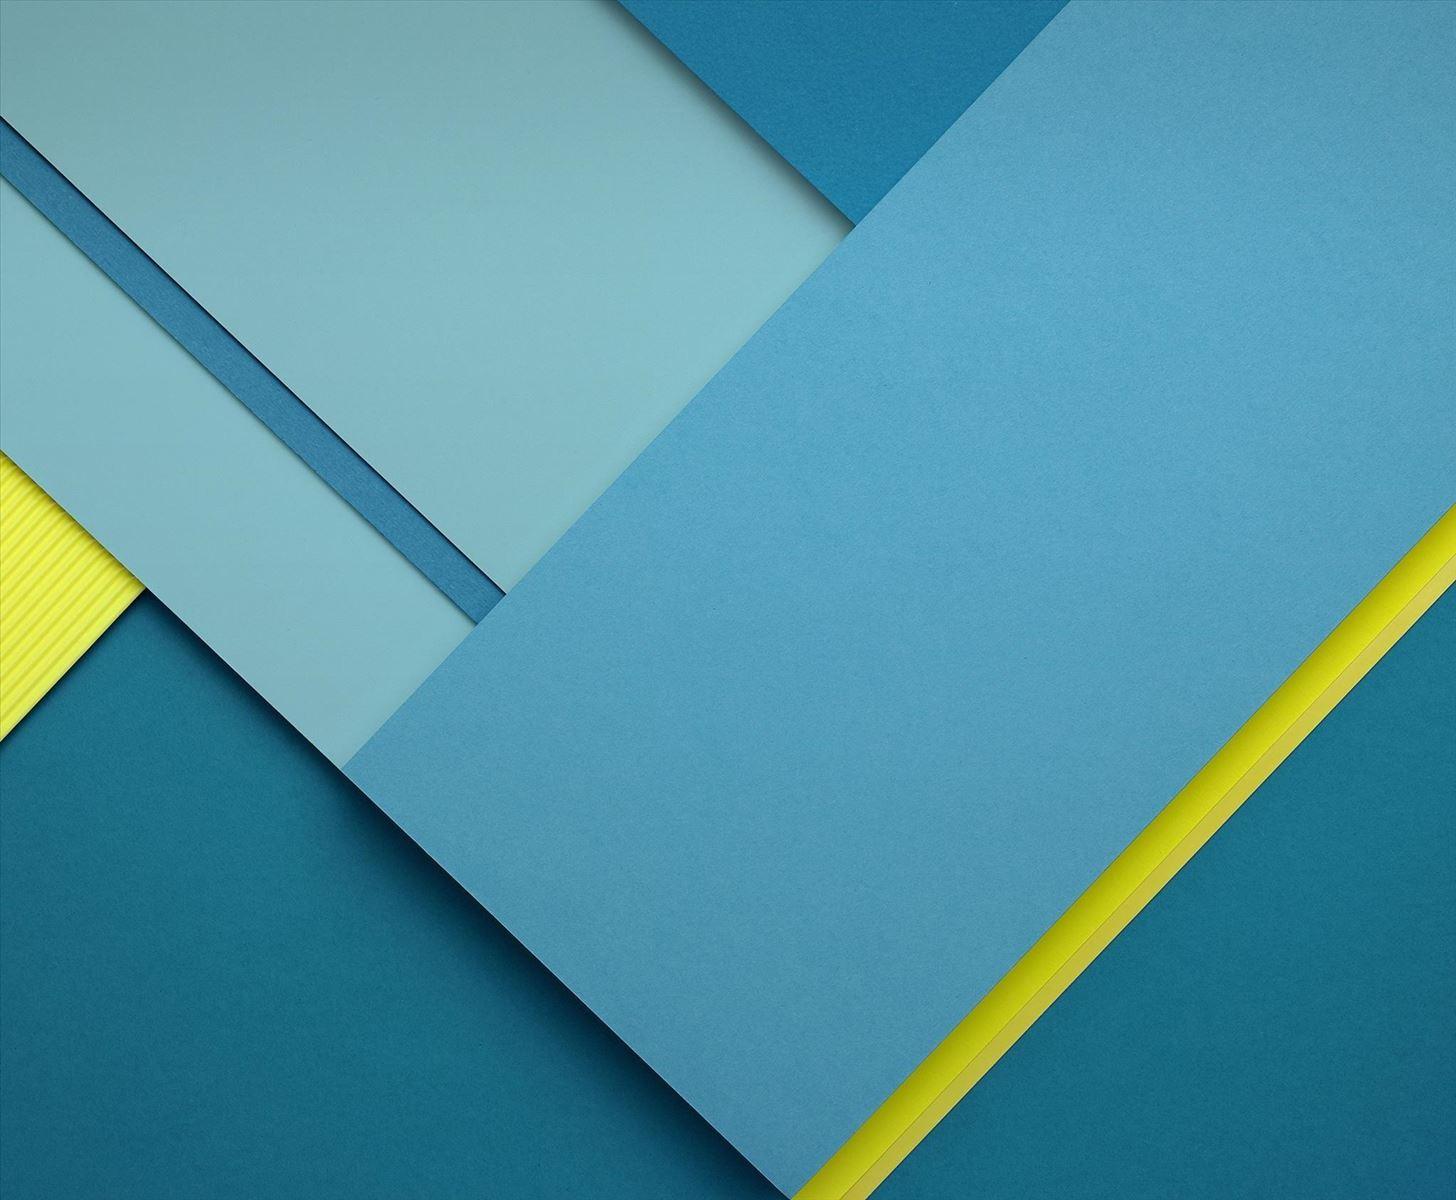 Download All the New Android Lollipop Wallpaper Right Now